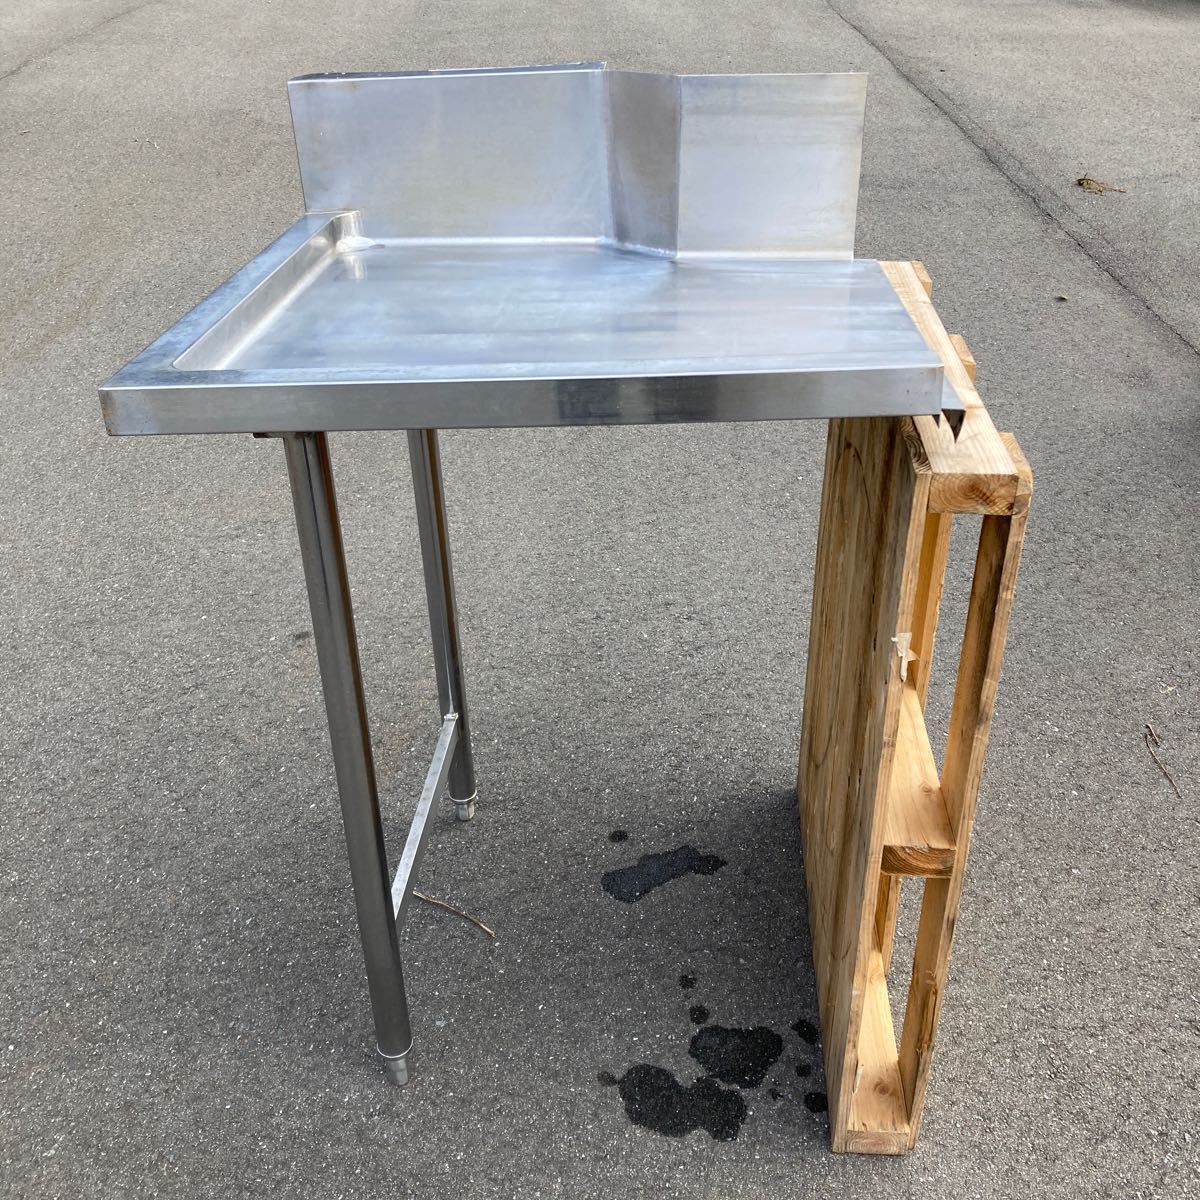 [ Fukuoka departure ] clean table so il do table dishwasher for working bench business use kitchen equipment for kitchen use goods eat and drink shop store articles W670×D685×H865mm used 